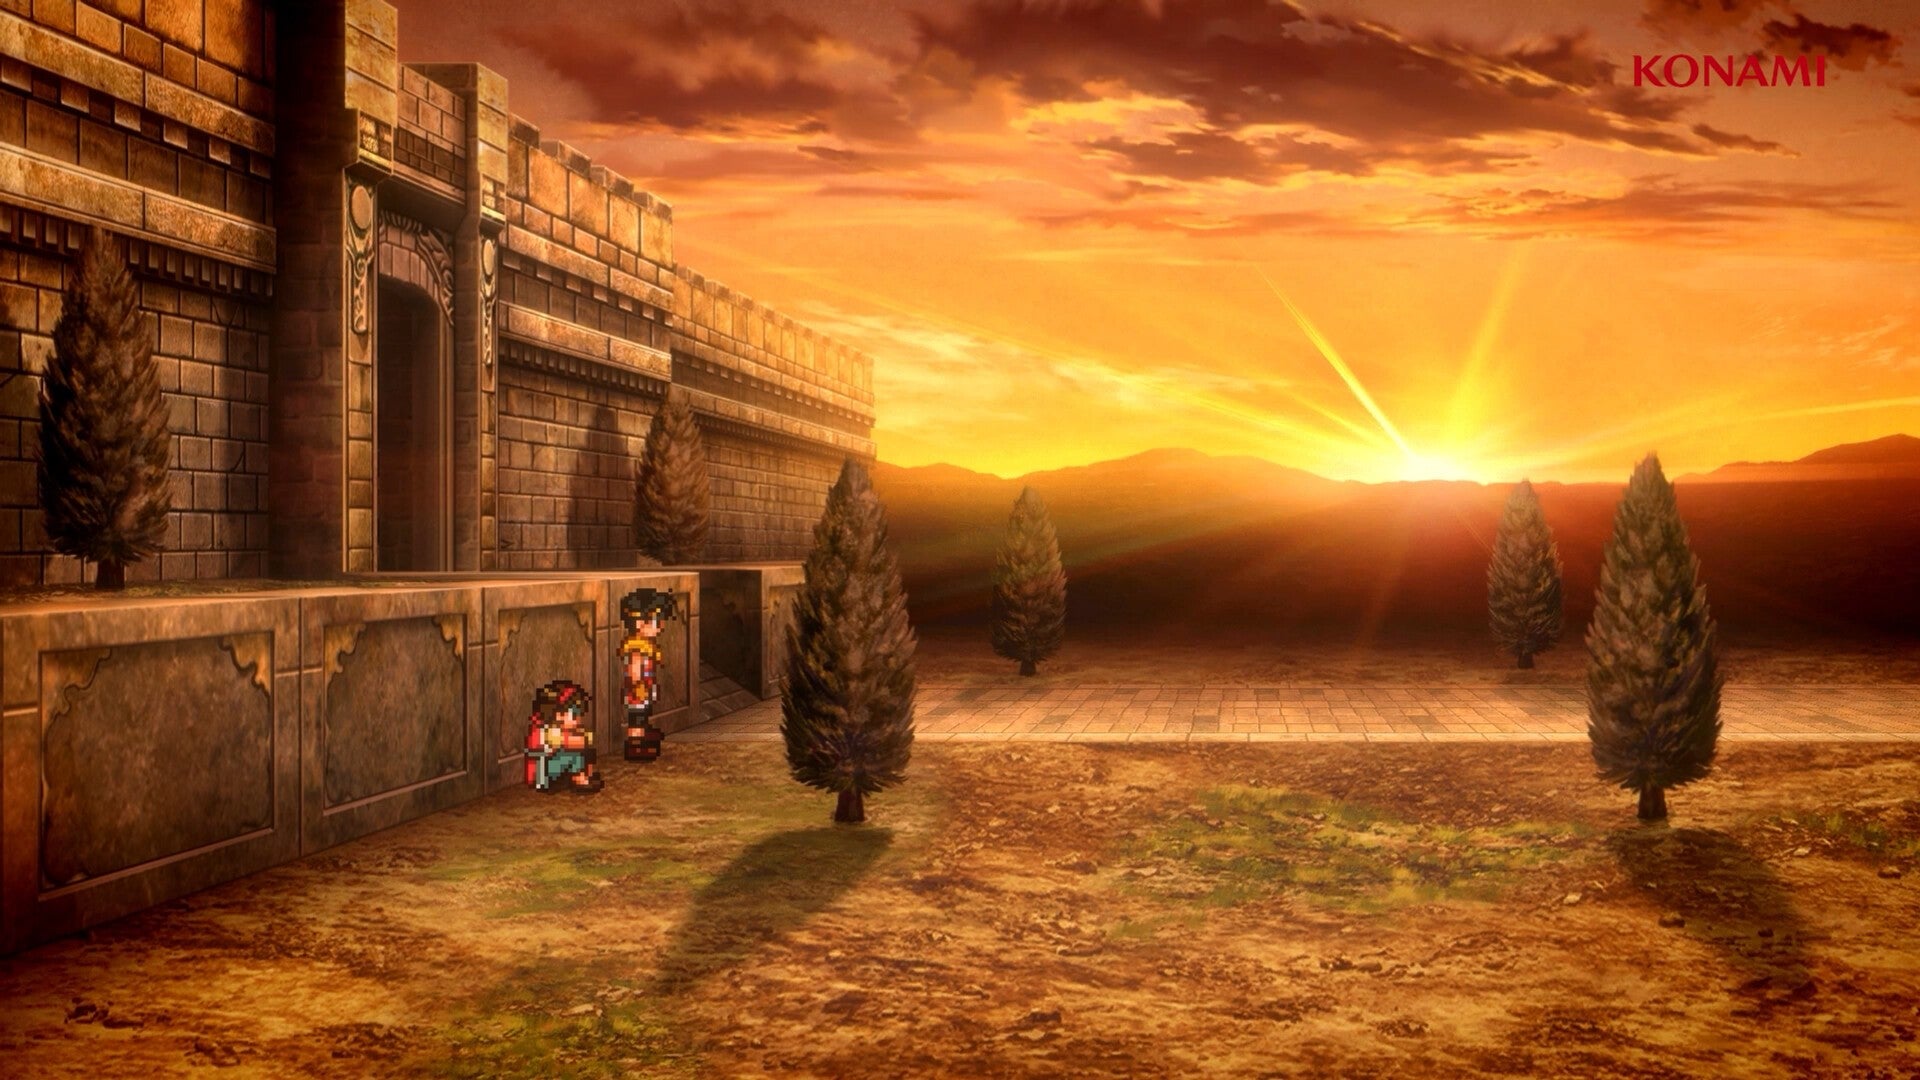 Konami have revealed Suikoden I & II HD Remaster, coming to PC on Steam in 2023.